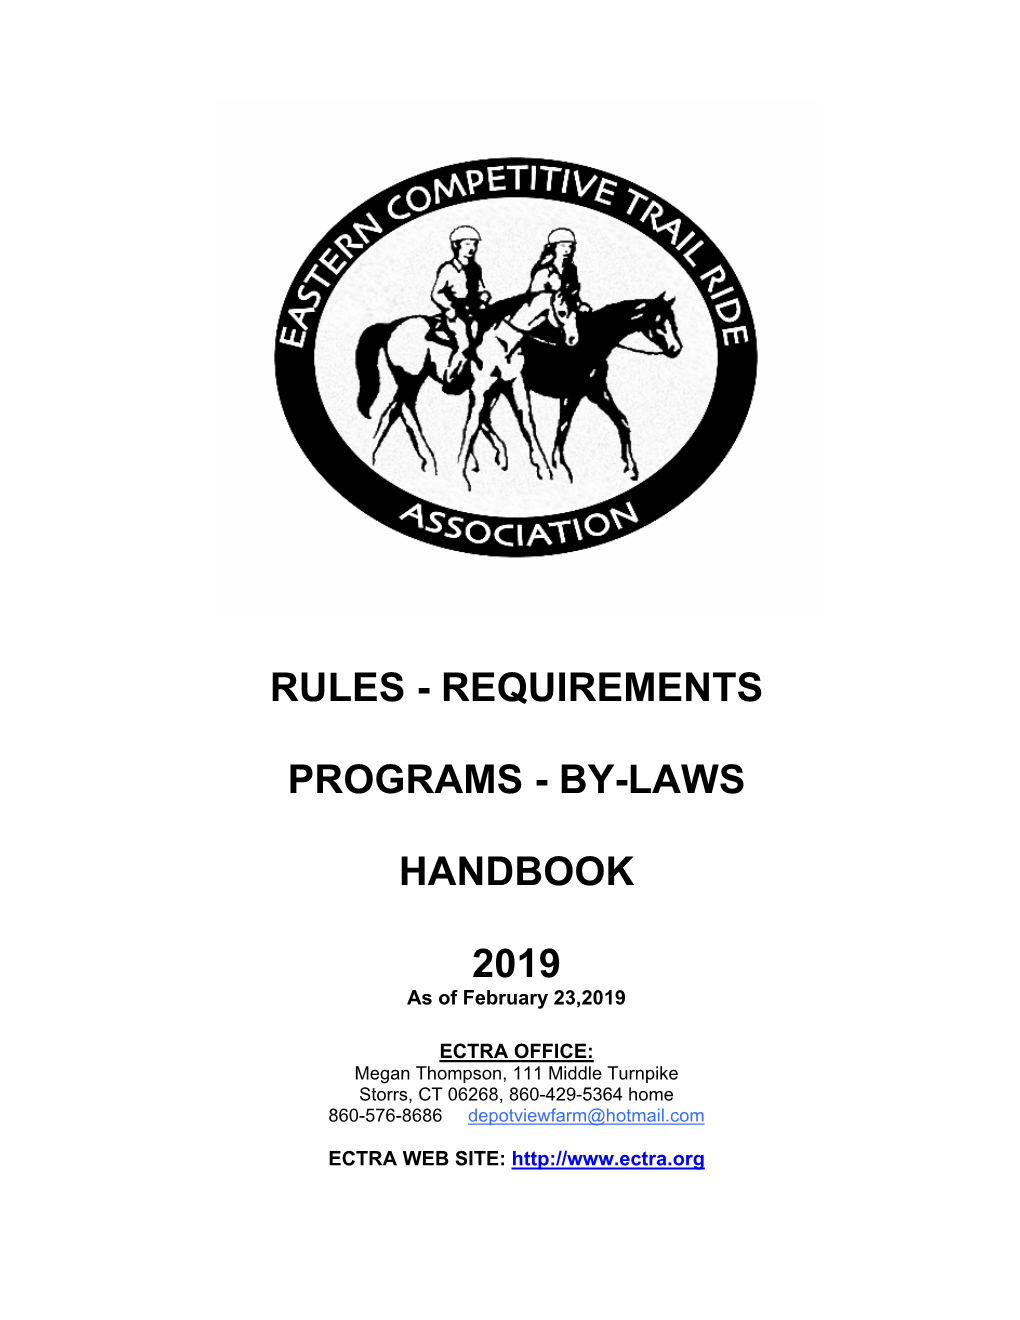 Rules - Requirements